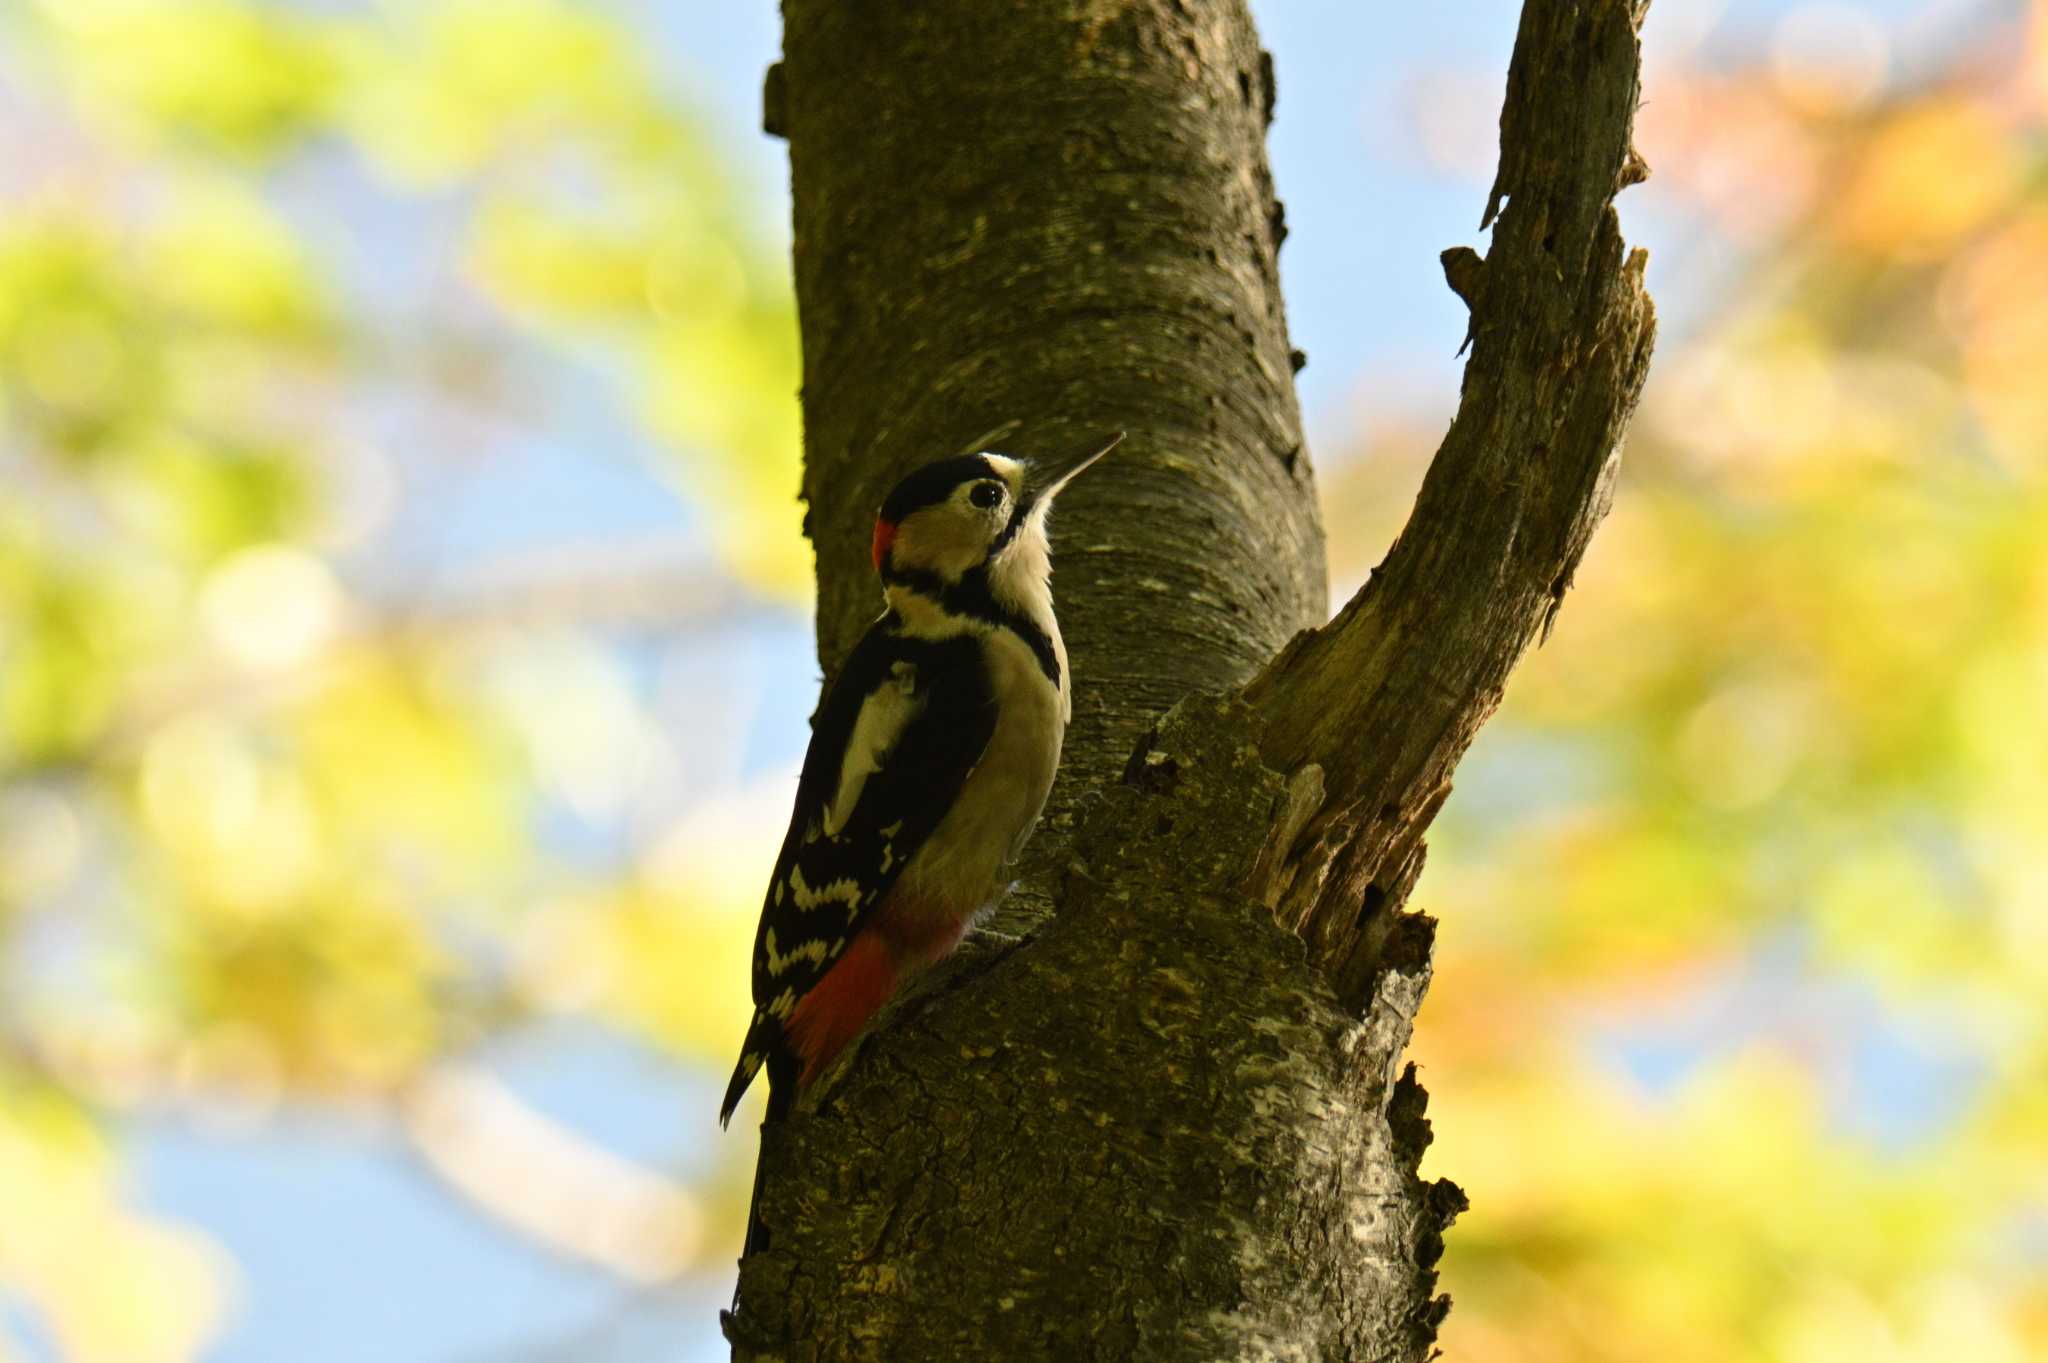 Photo of Great Spotted Woodpecker at Nishioka Park by North* Star*